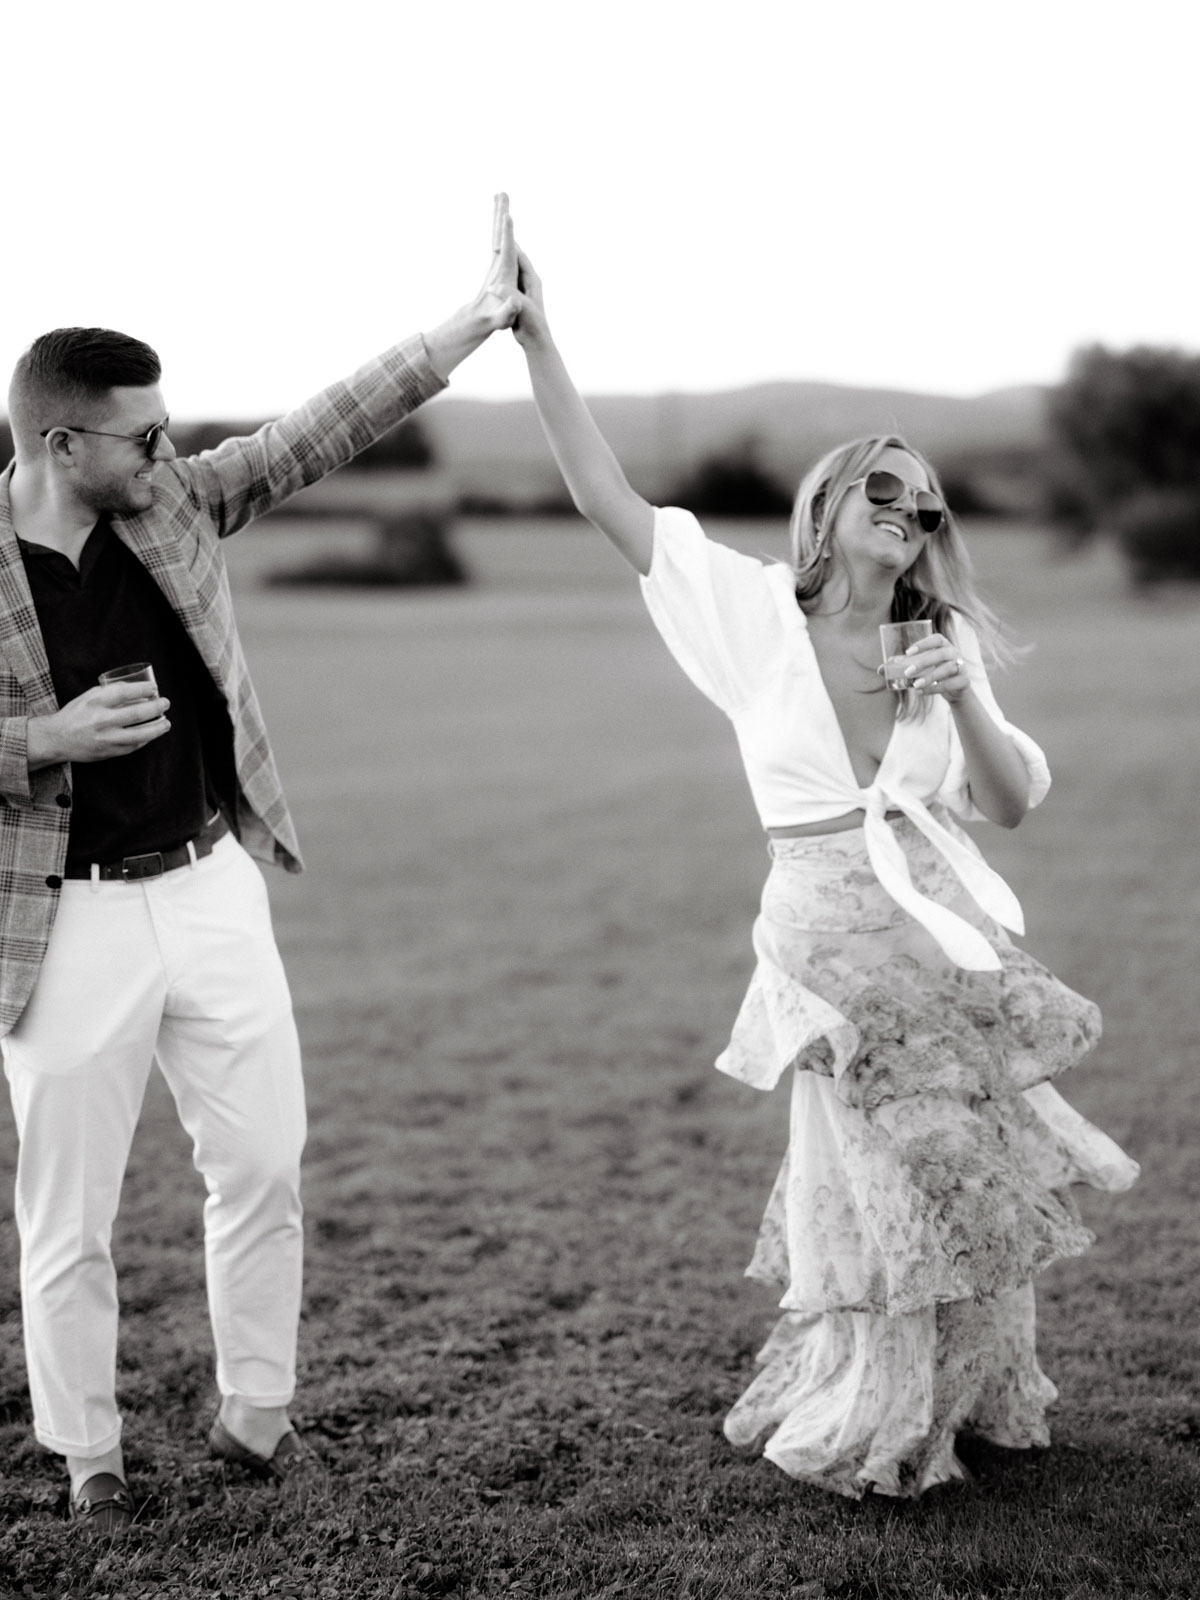 The bride and groom are happily dancing in an open field. Editorial rehearsal dinner image by Jenny Fu Studio.